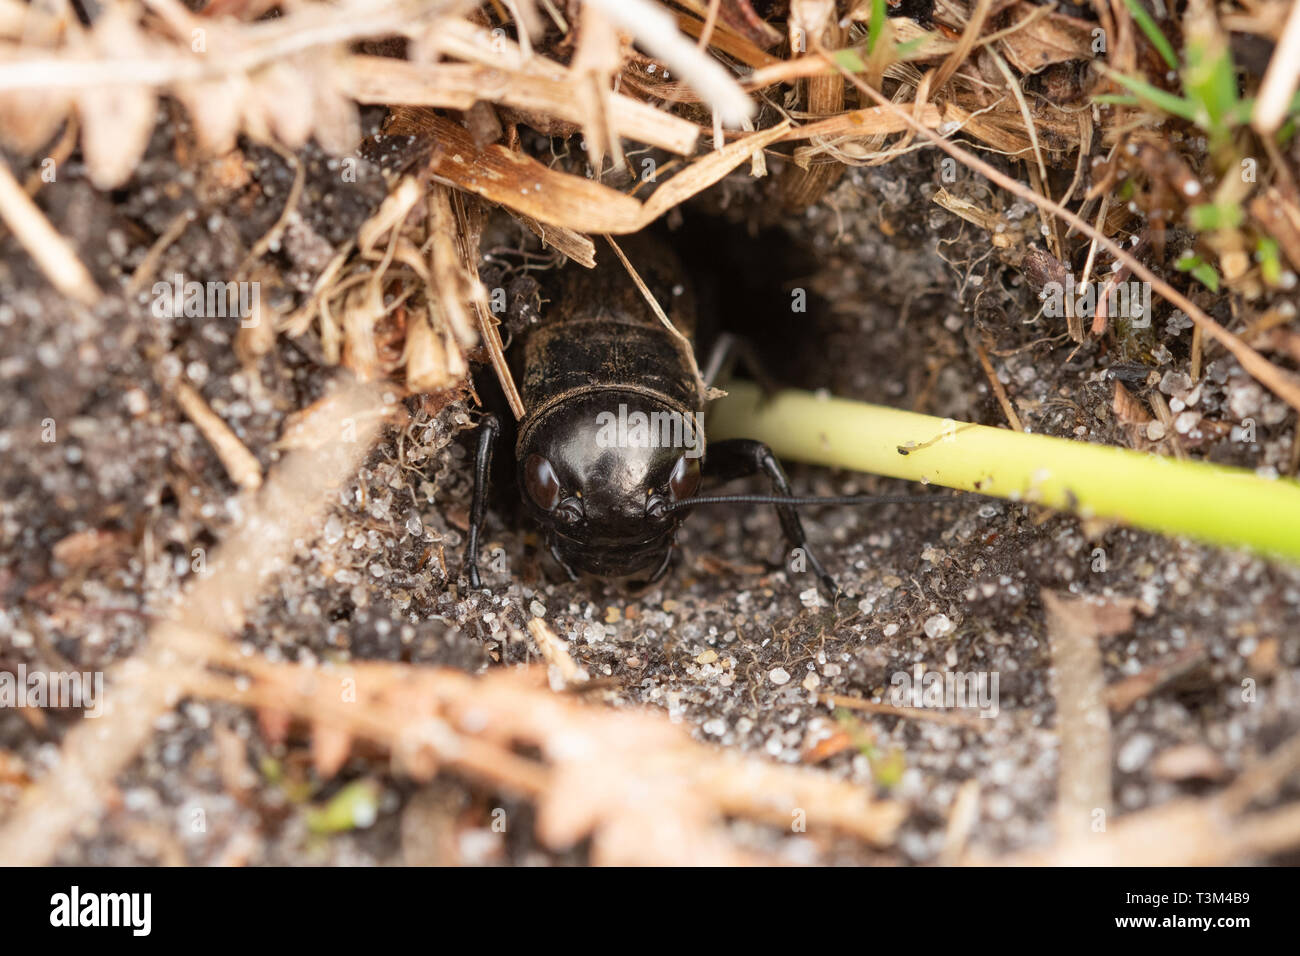 Field cricket (Gryllus campestris) nymph, a rare insect species in the UK, being coaxed out of its burrow for a translocation conservation project Stock Photo